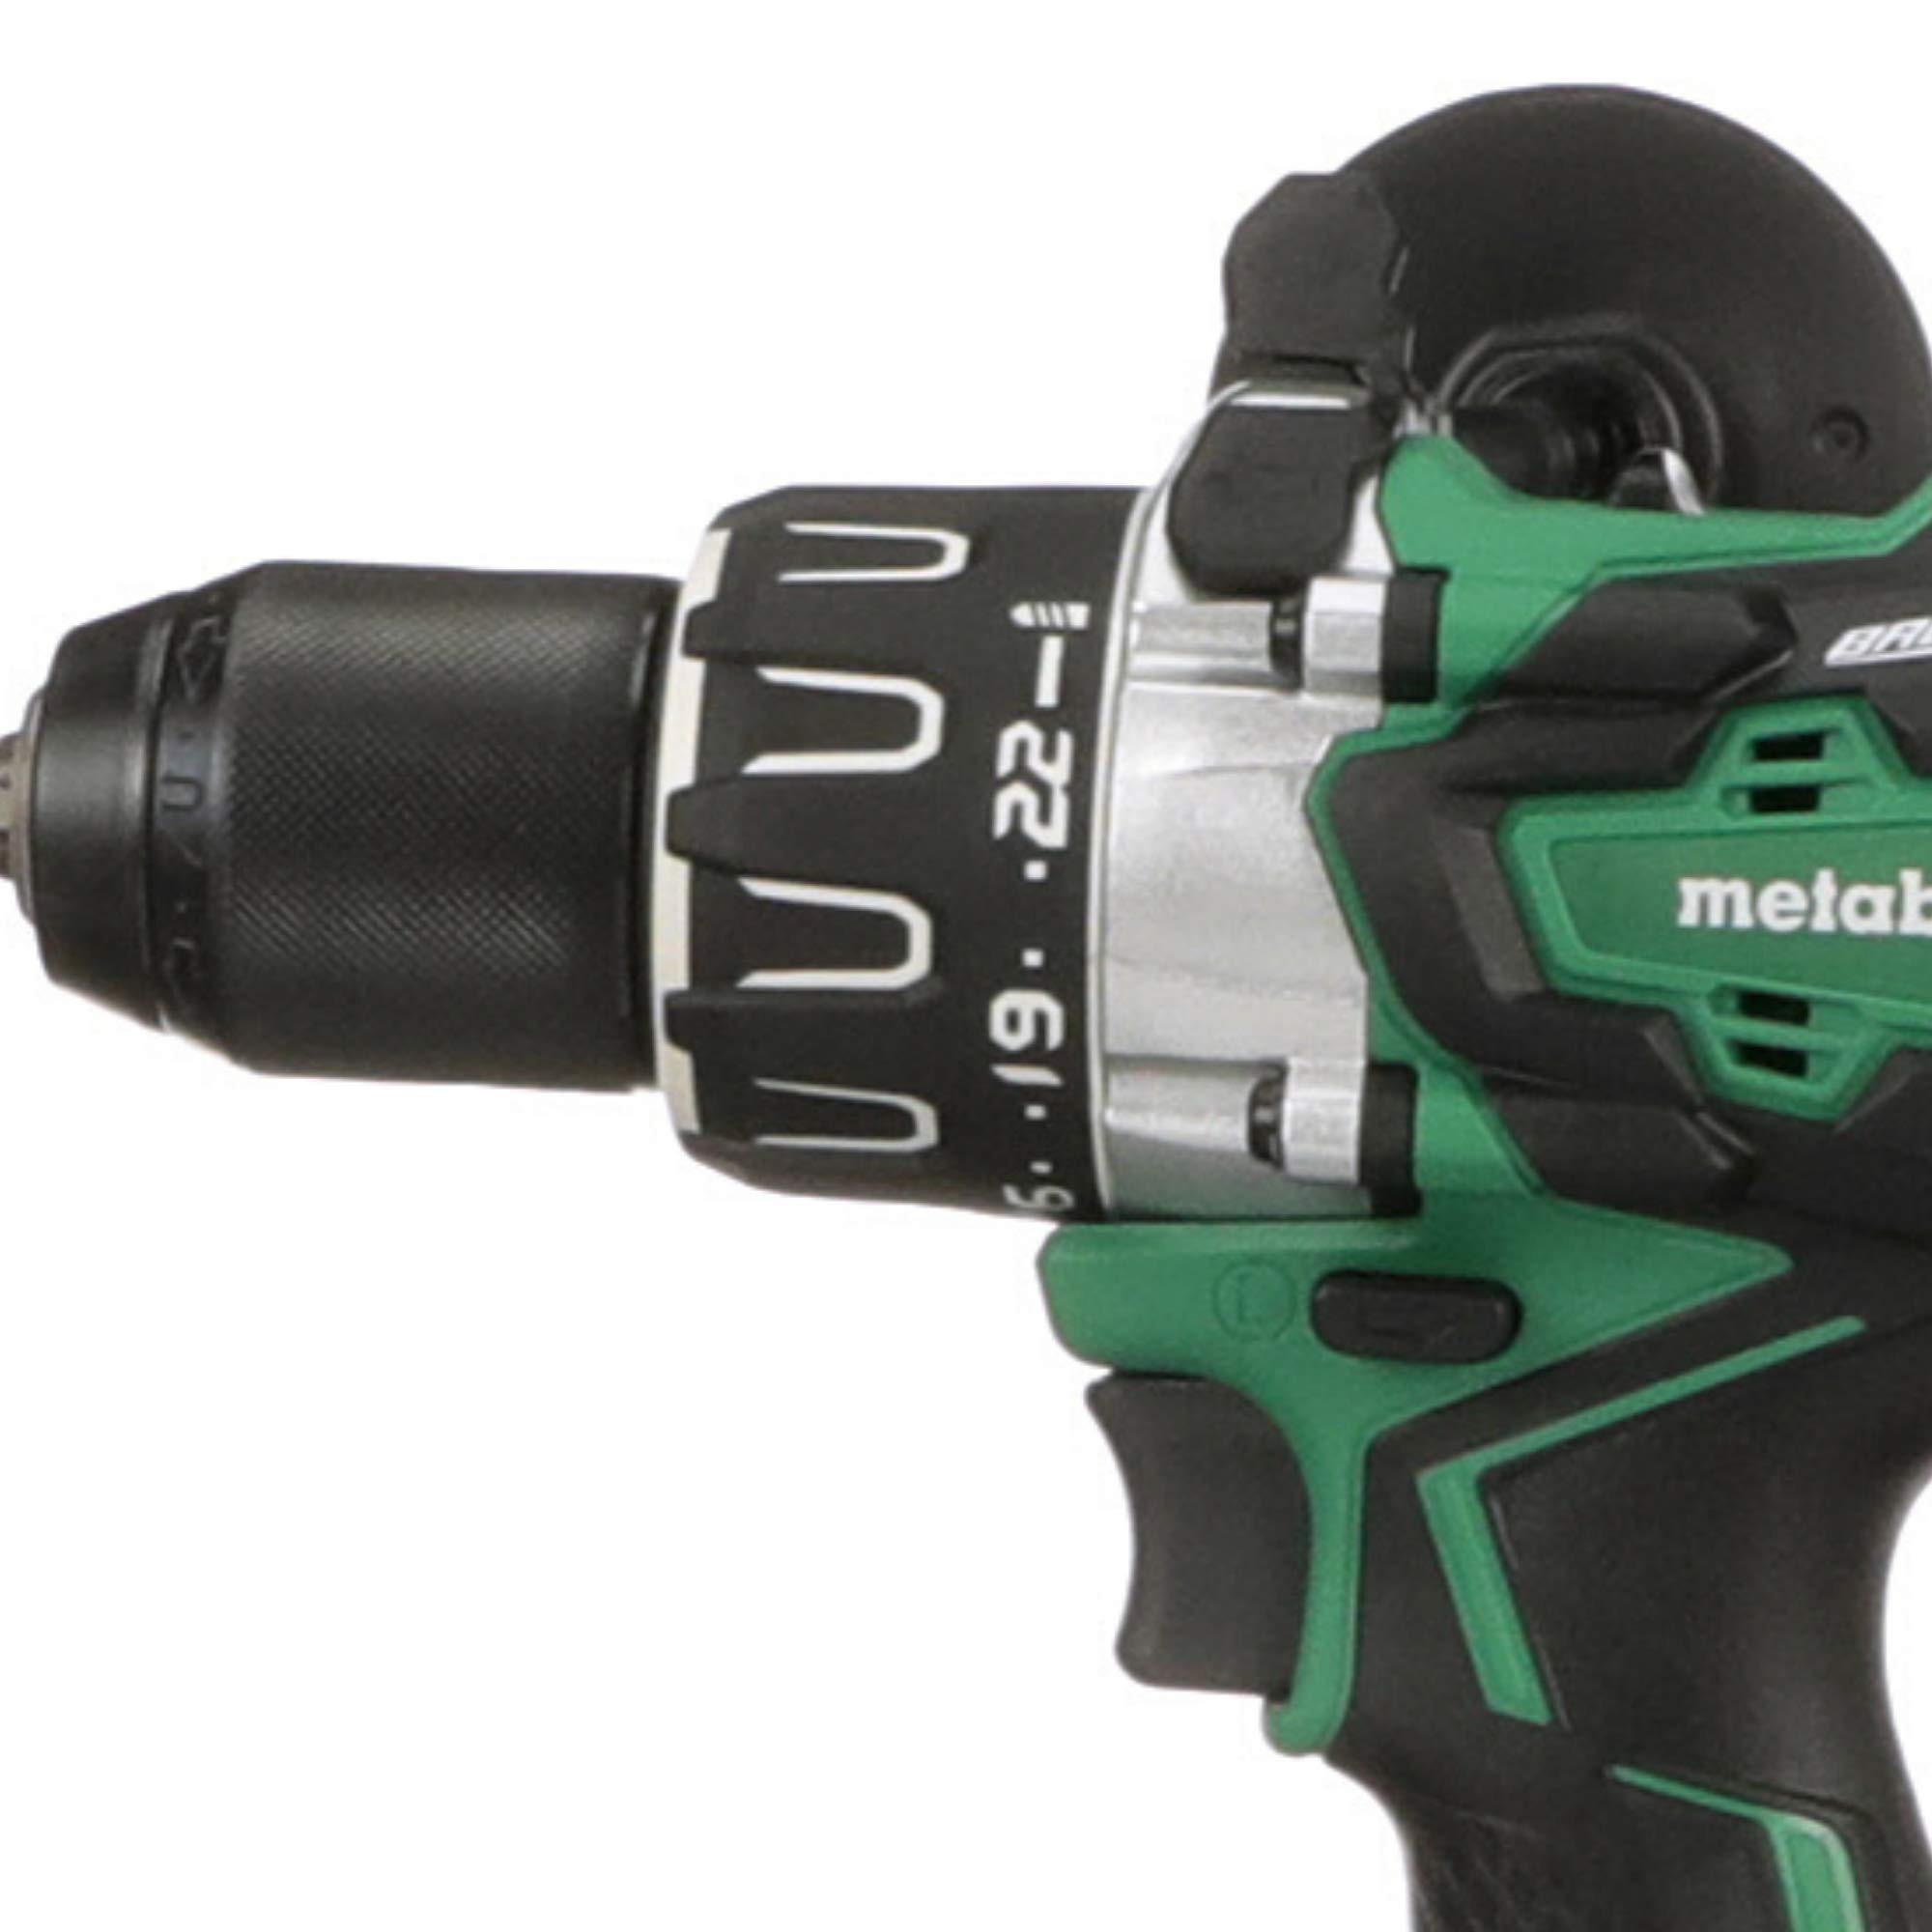 Metabo HPT 18V Cordless Brushless Hammer Drill, Tool Only - No Battery, Compatible with Hitachi/Metabo HPT 18V Lithium Ion Slide-Type Batteries, Lifetime Tool Warranty (DV18DBL2Q4)